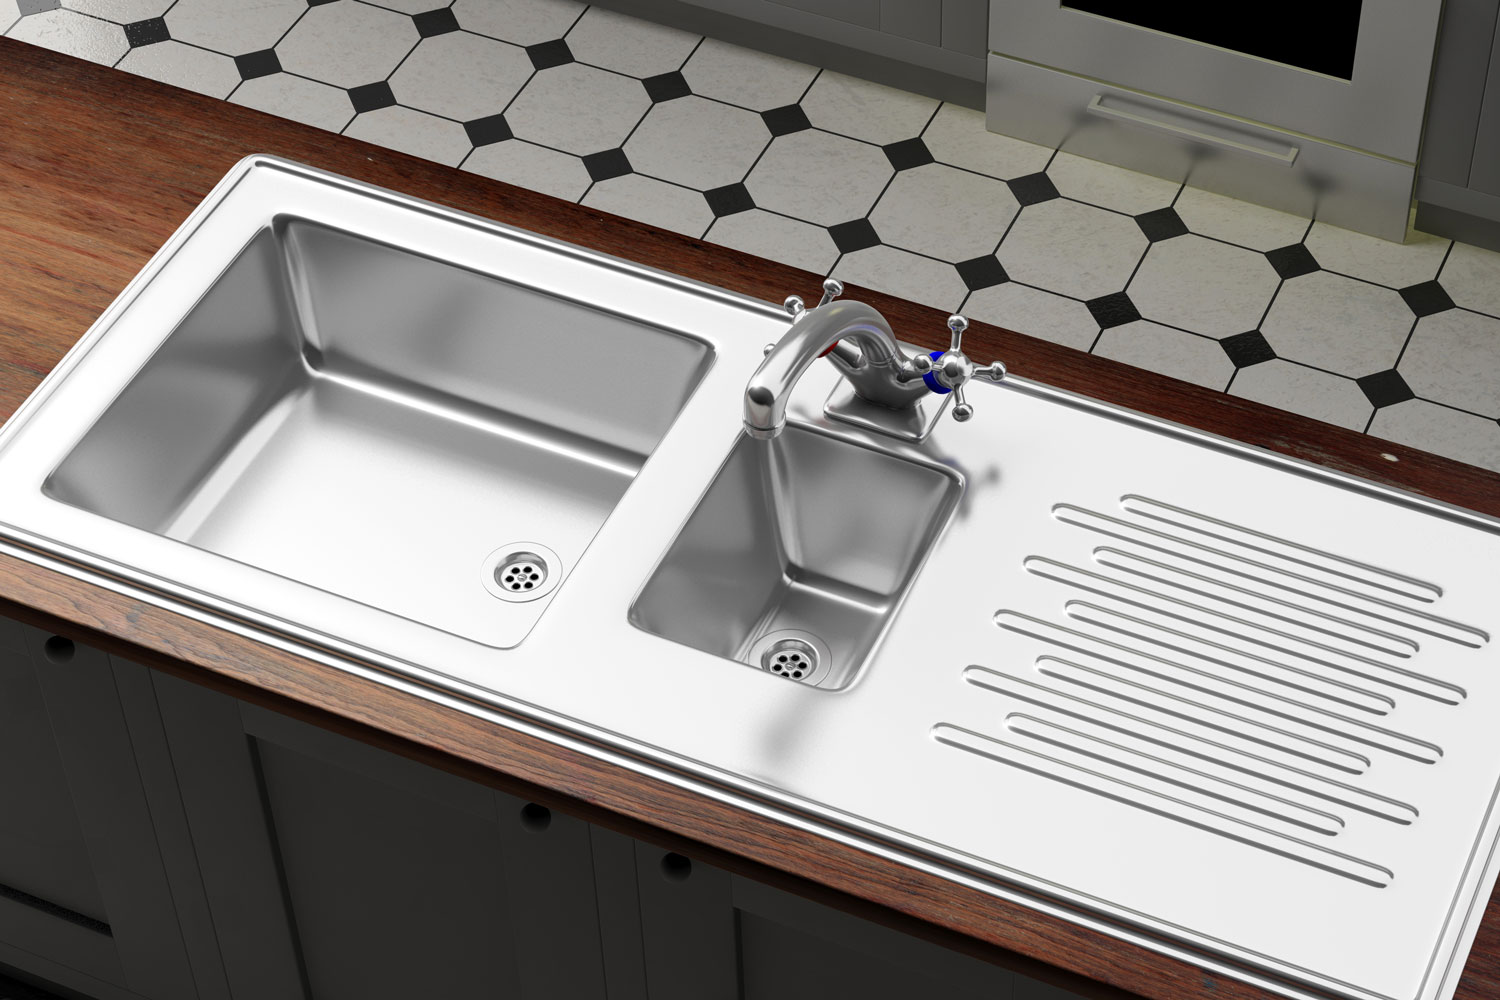 A stainless steel sink with wooden countertop inside a modern kitchen